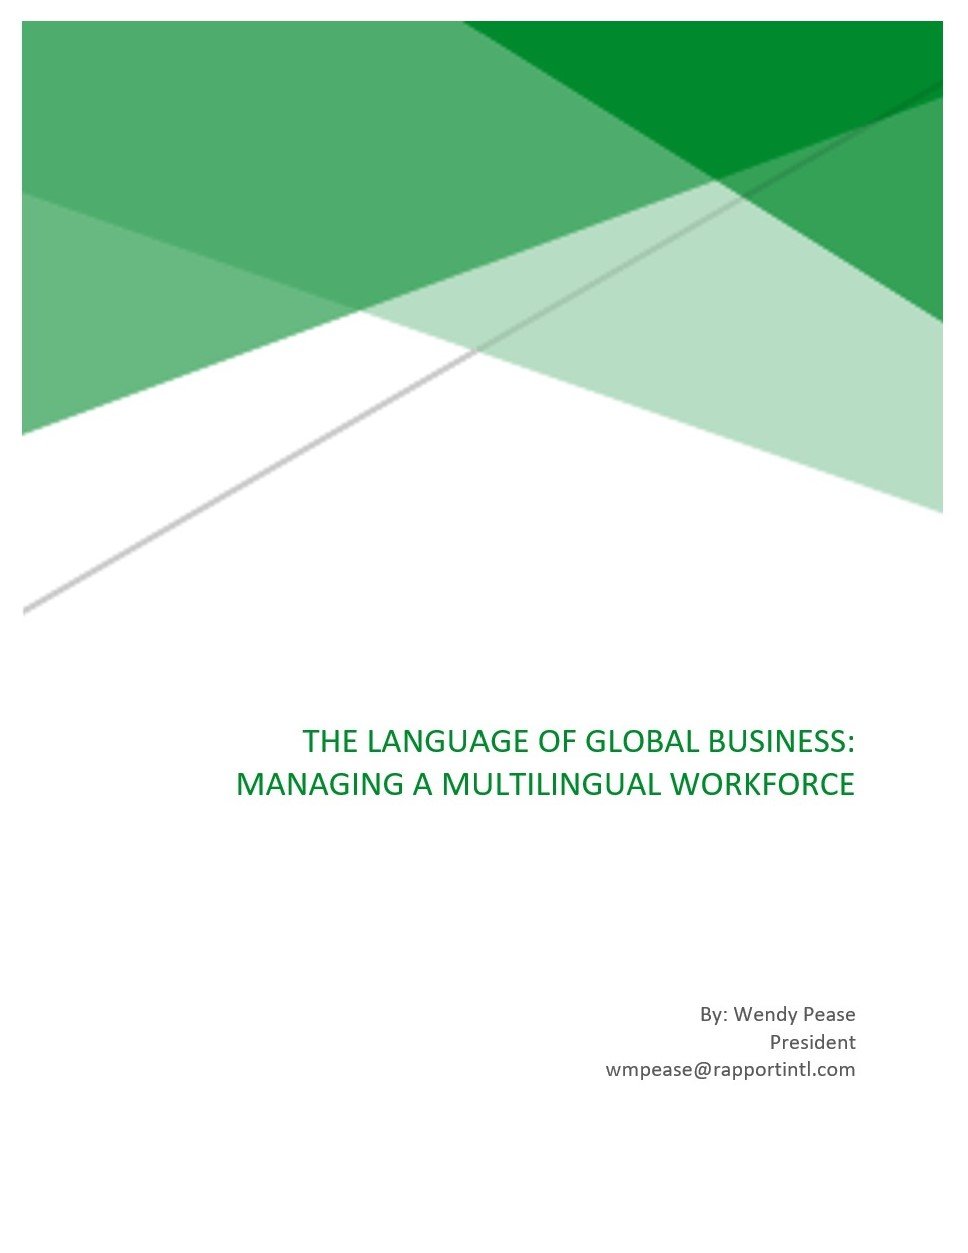 Global Business - Managing a Multilingual Workforce cover